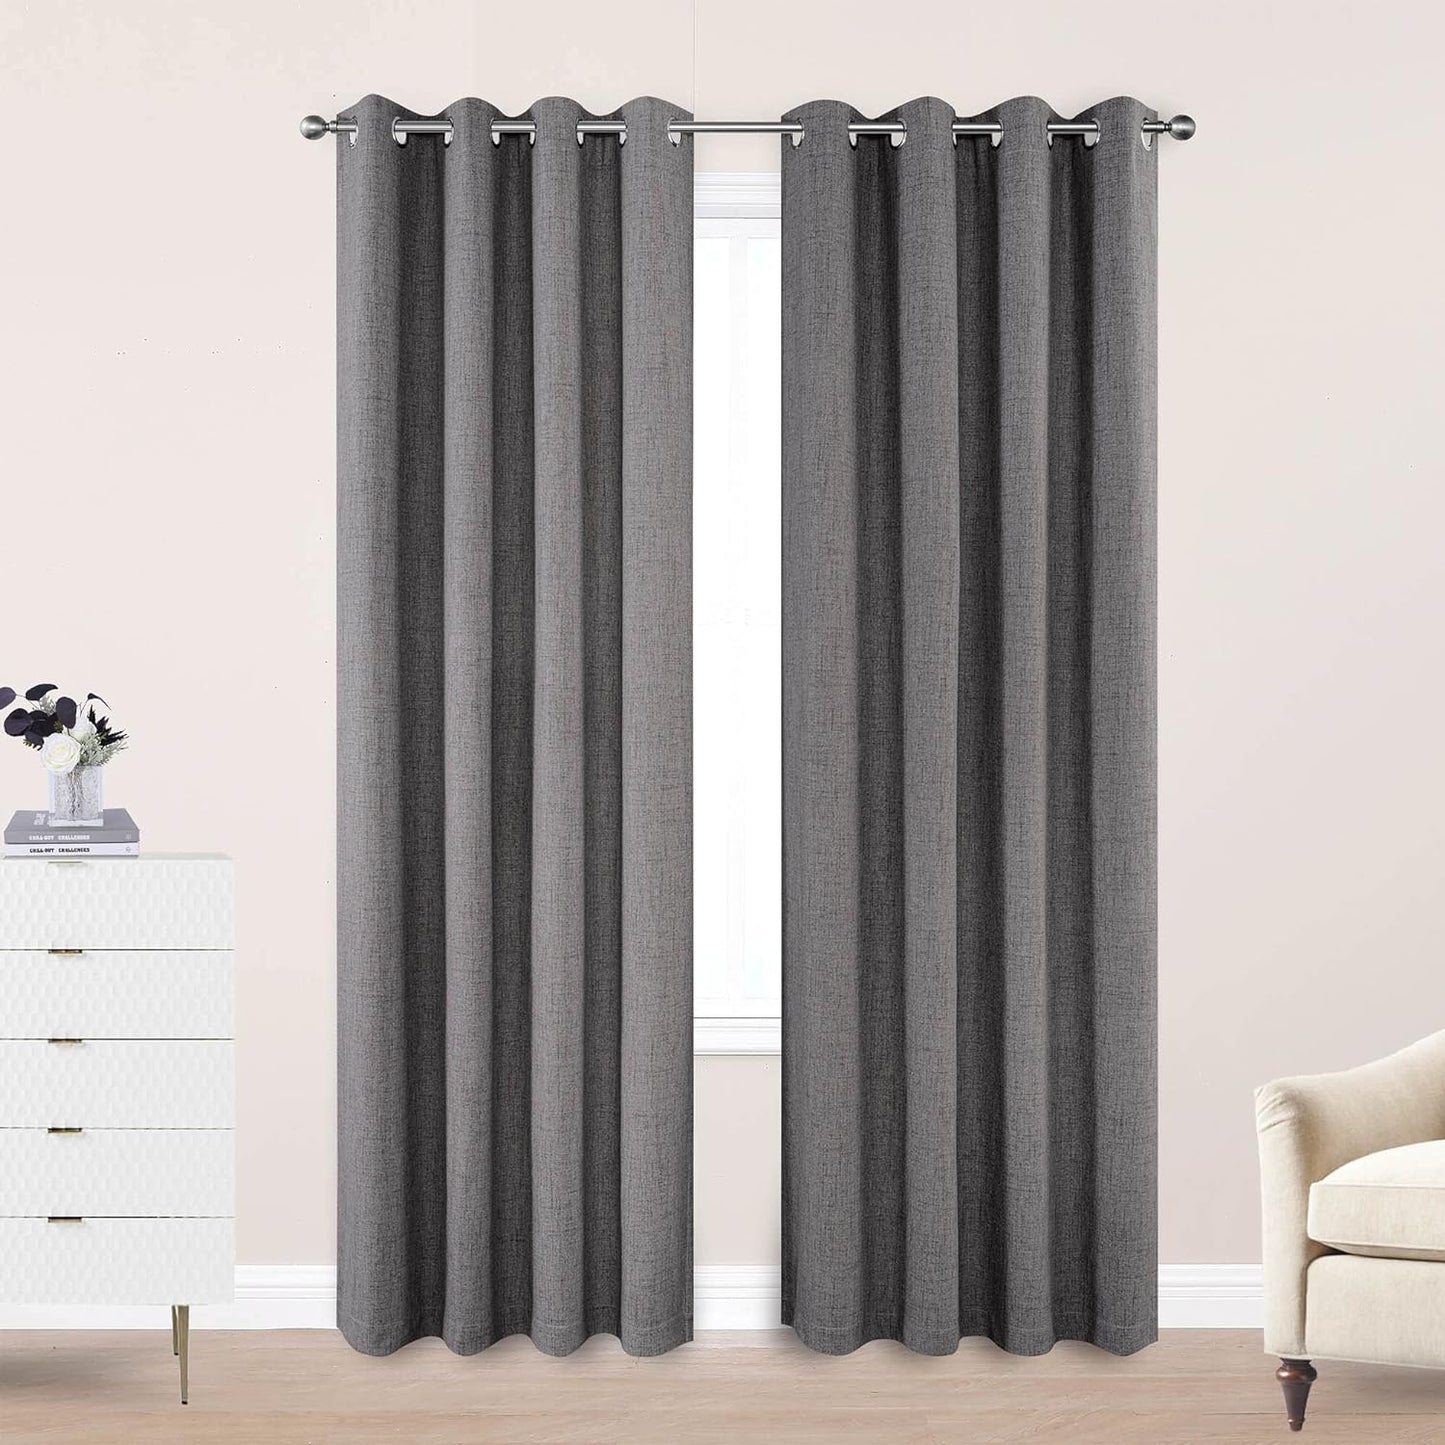 CUCRAF Full Blackout Window Curtains 84 Inches Long,Faux Linen Look Thermal Insulated Grommet Drapes Panels for Bedroom Living Room,Set of 2(52 X 84 Inches, Light Khaki)  CUCRAF Grey 52 X 84 Inches 